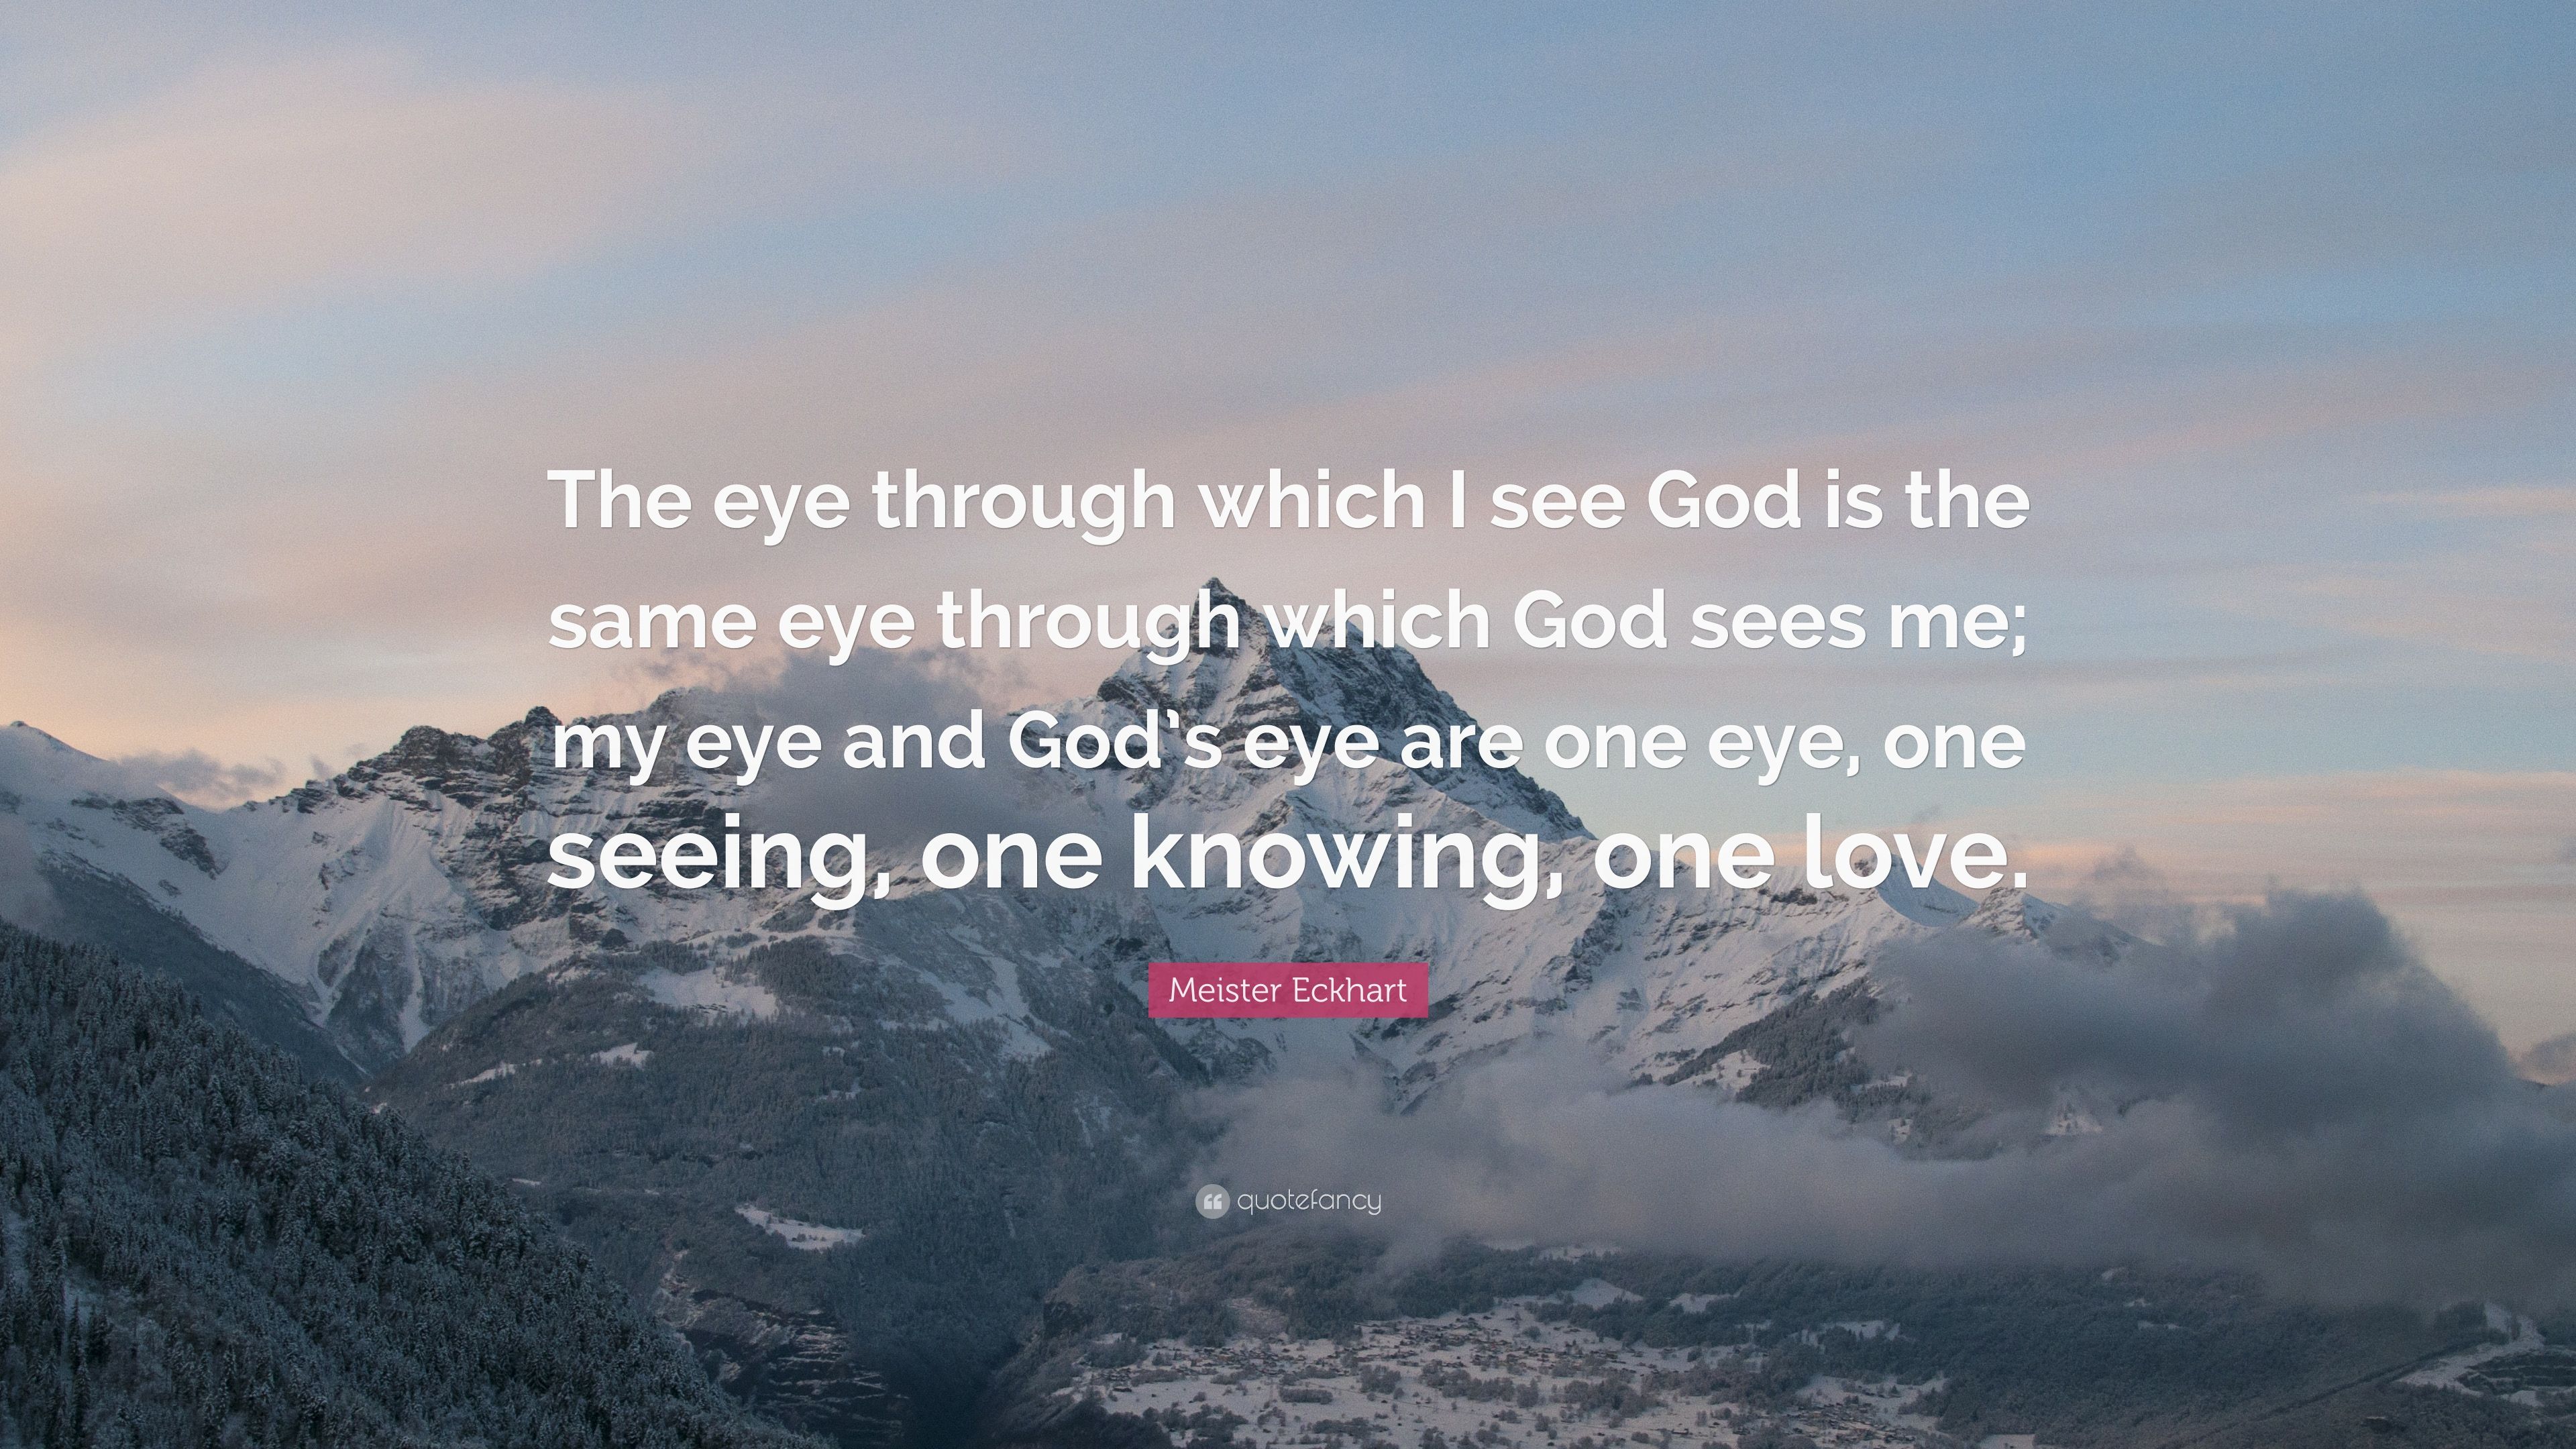 Meister Eckhart Quote: “The eye through which I see God is the same